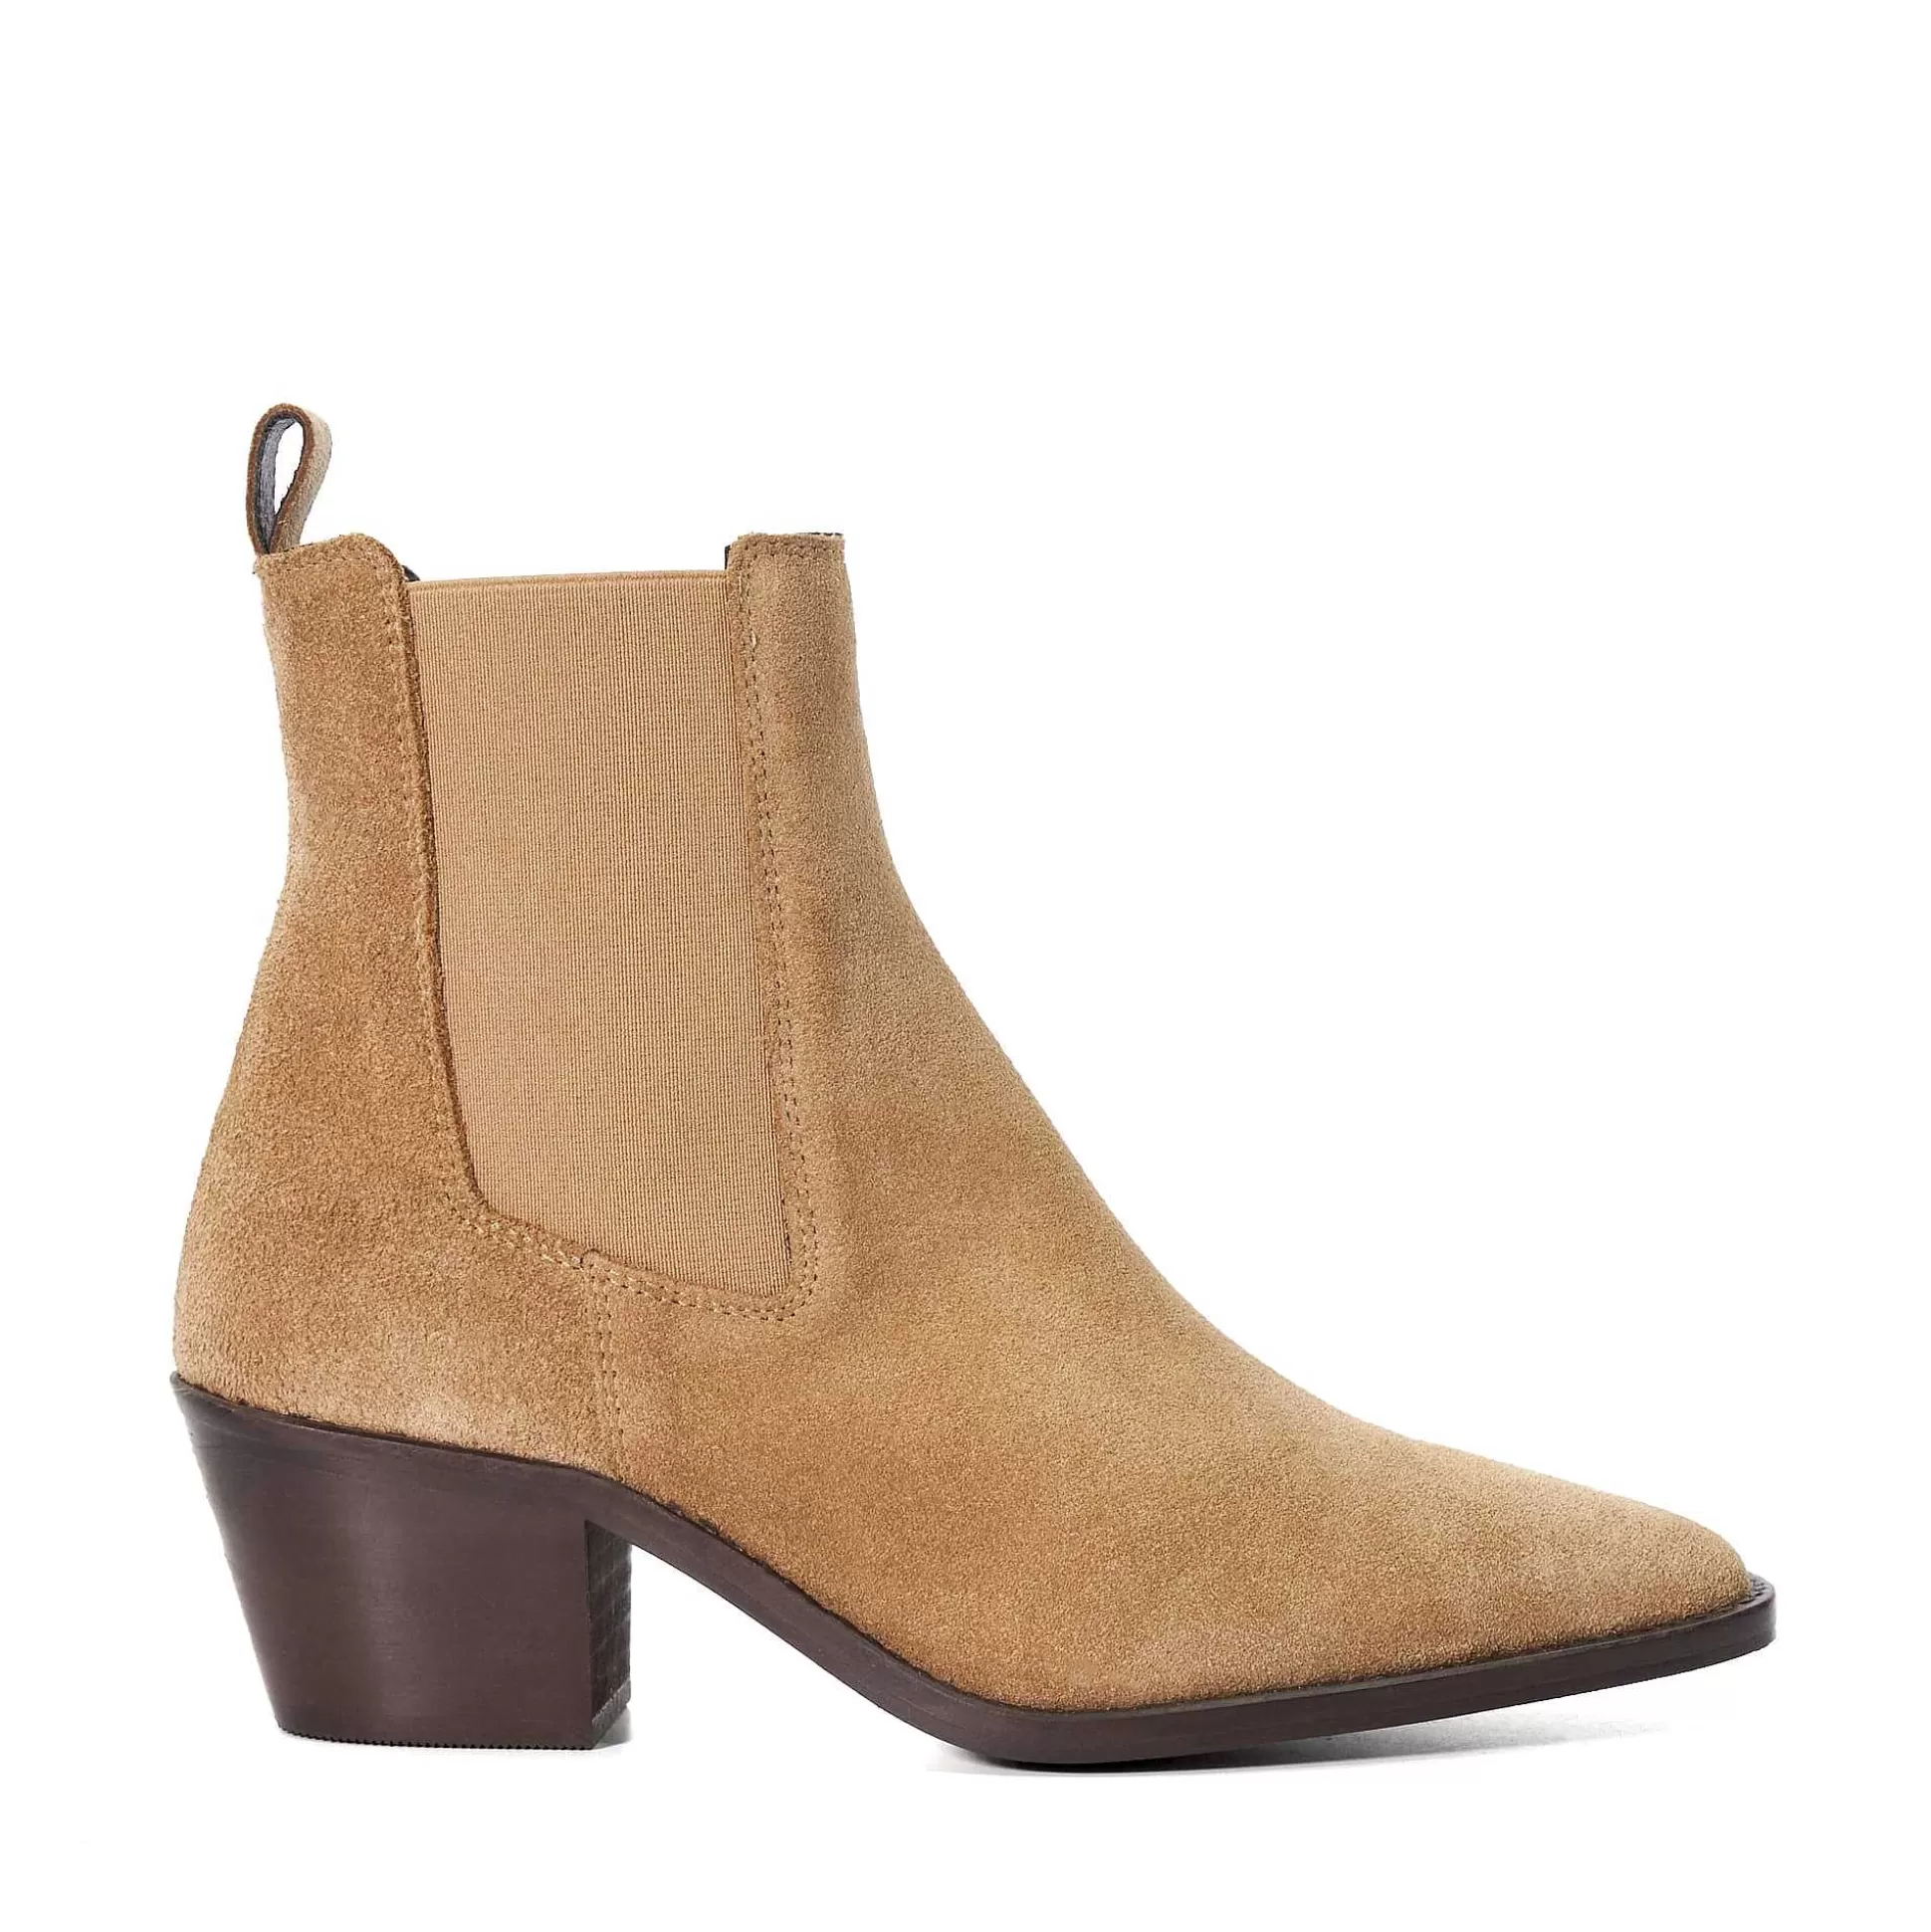 Dune London PEXAS - SAND-Women Ankle Boots | Western Cowboy Boots